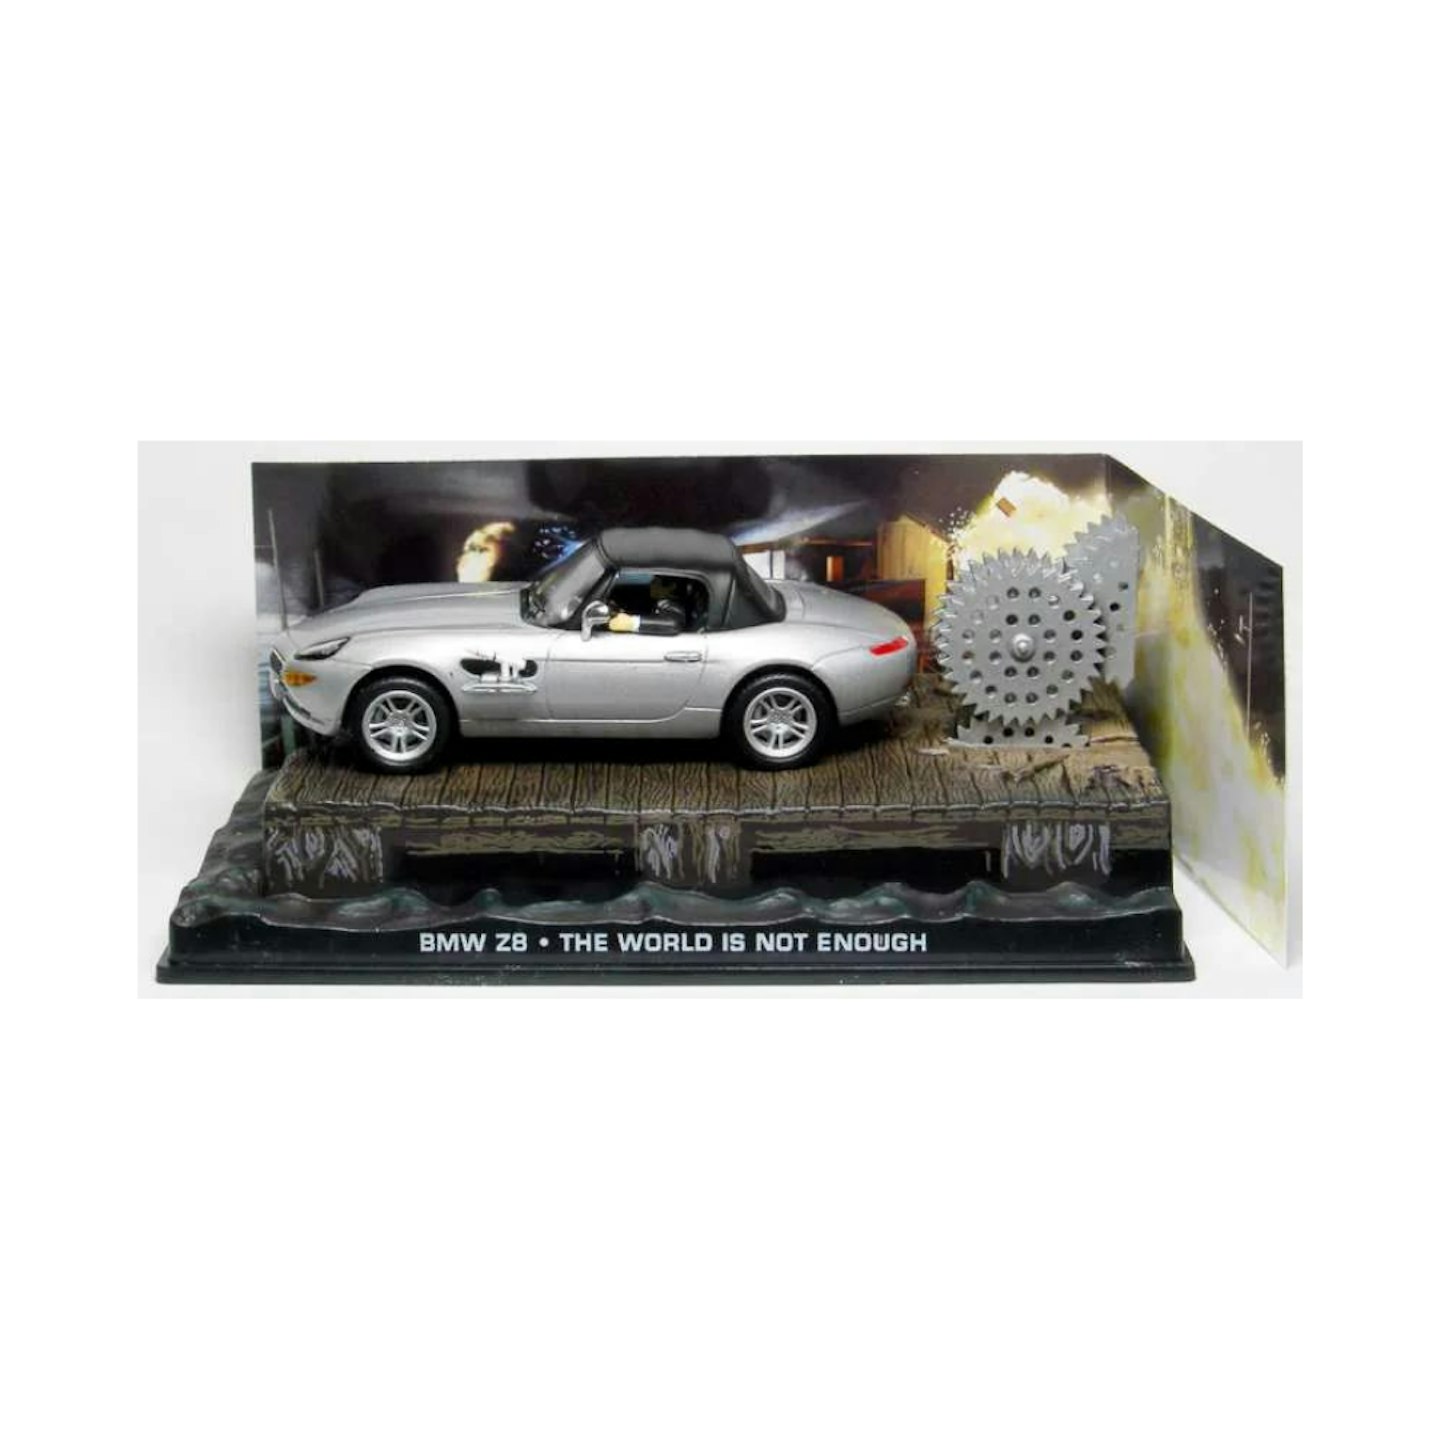 BMW Z8 Diecast Model Car from The World Is Not Enough